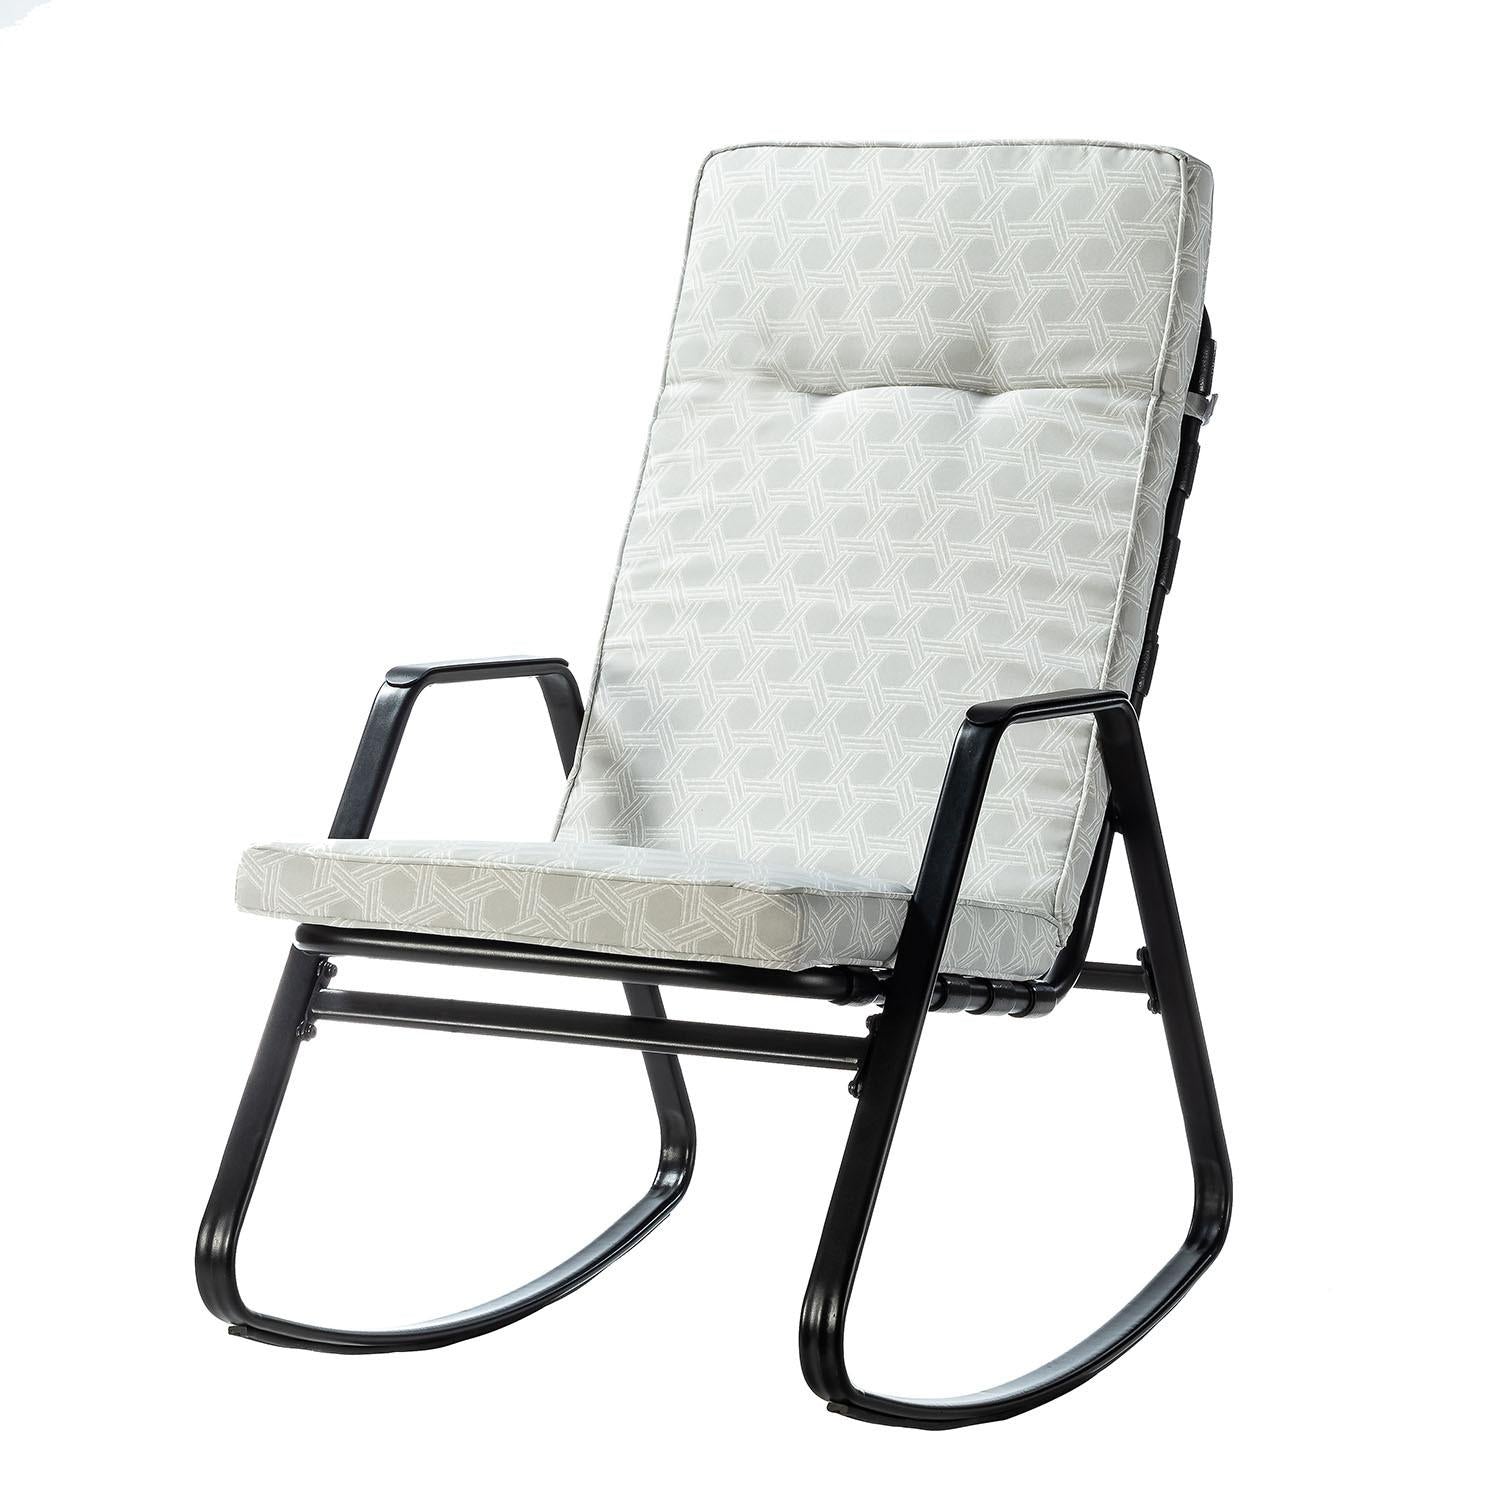 Black and Cream Outdoor Rocking Chair and Table Set